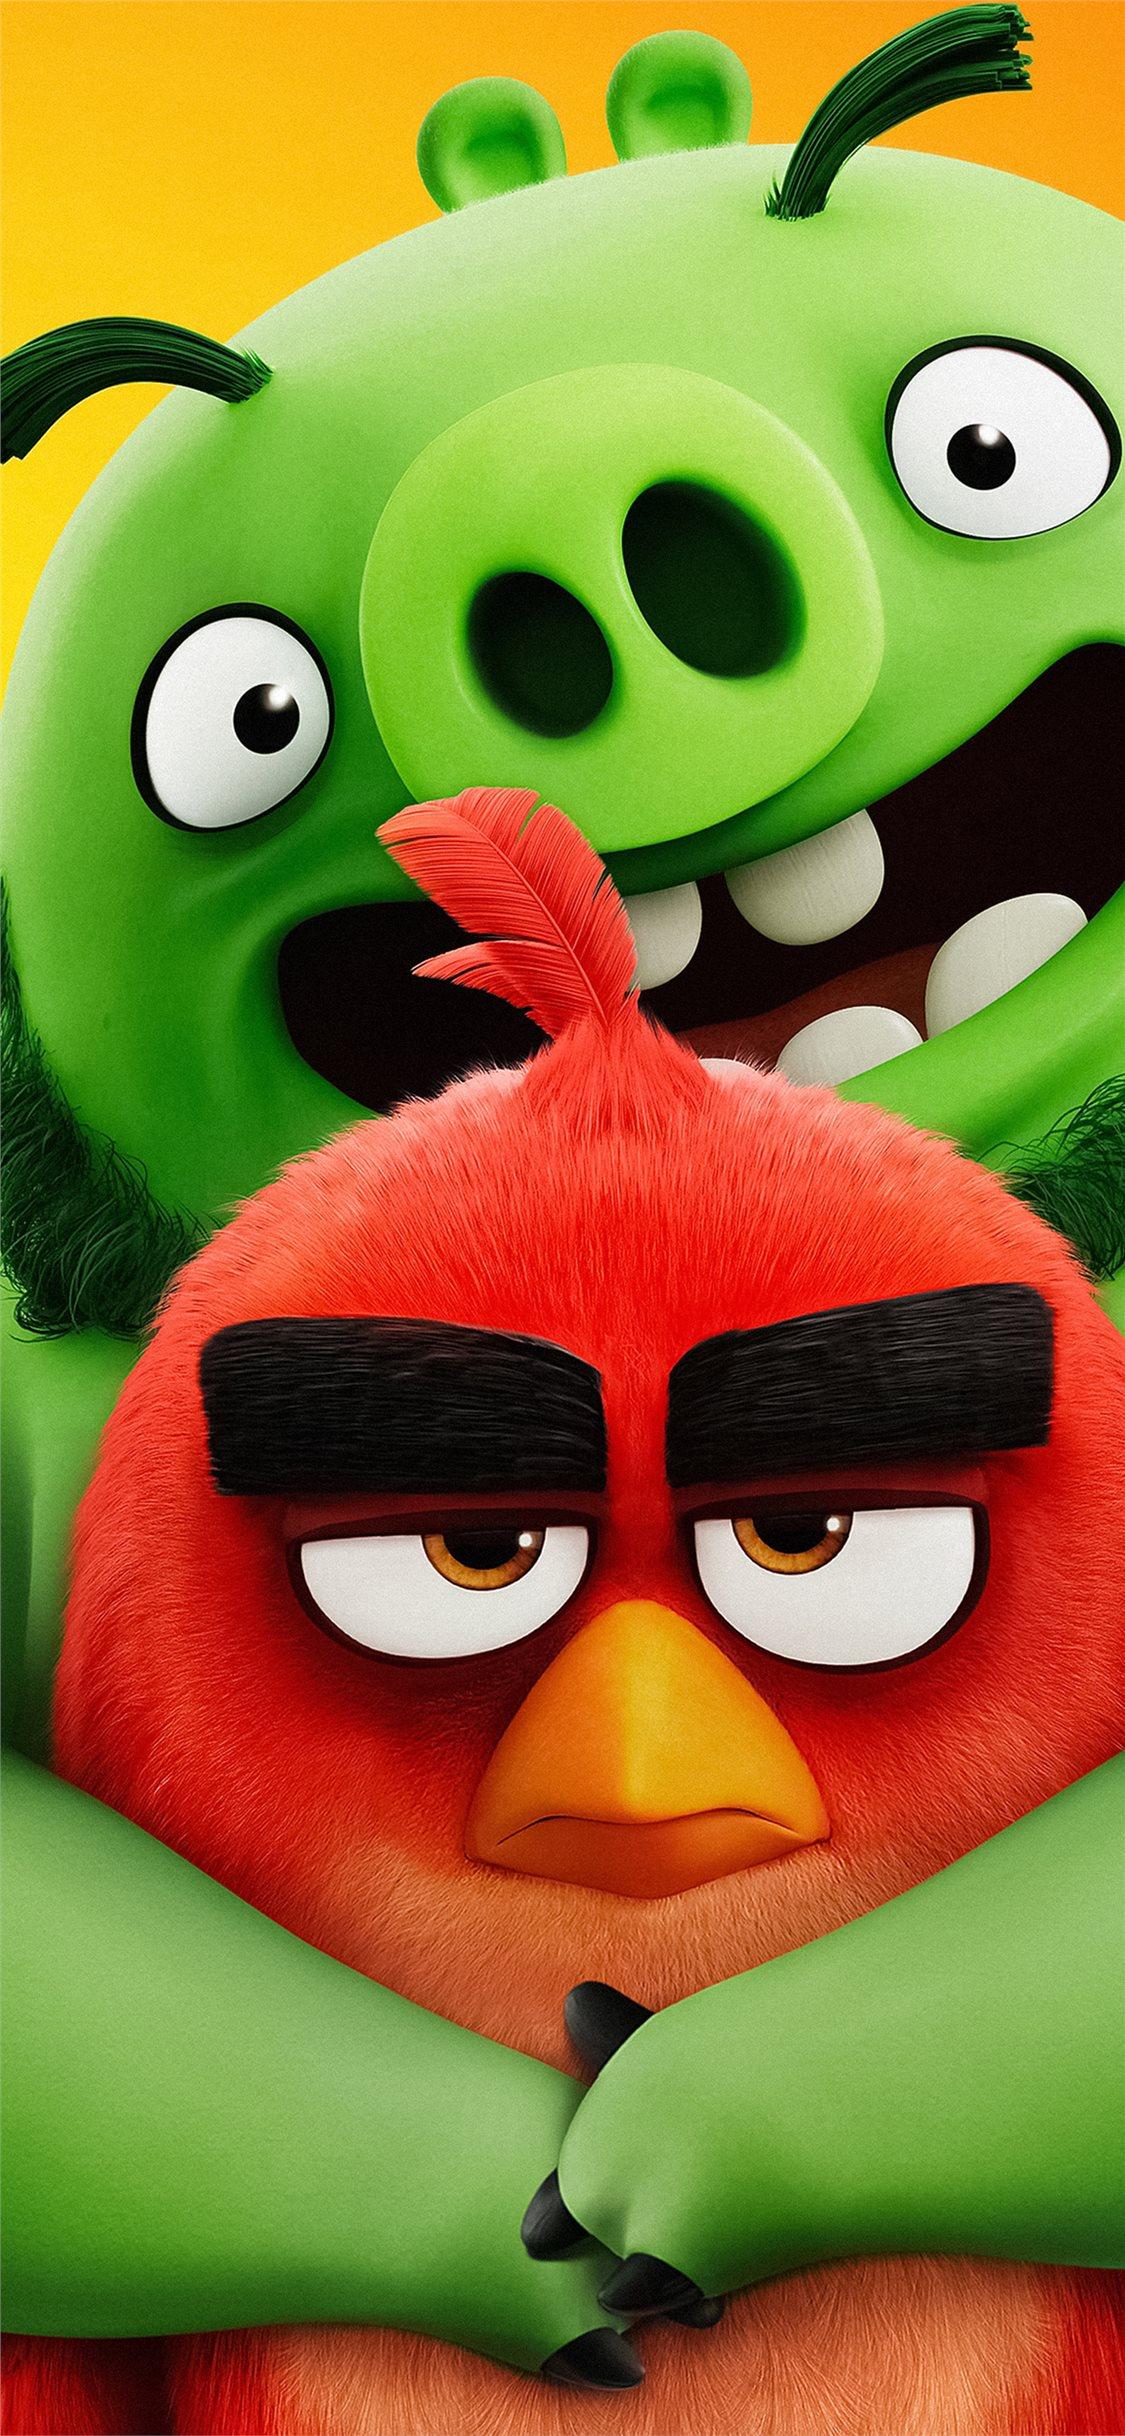 the angry birds movie 2 2019 5k new iPhone X Wallpaper Free Download